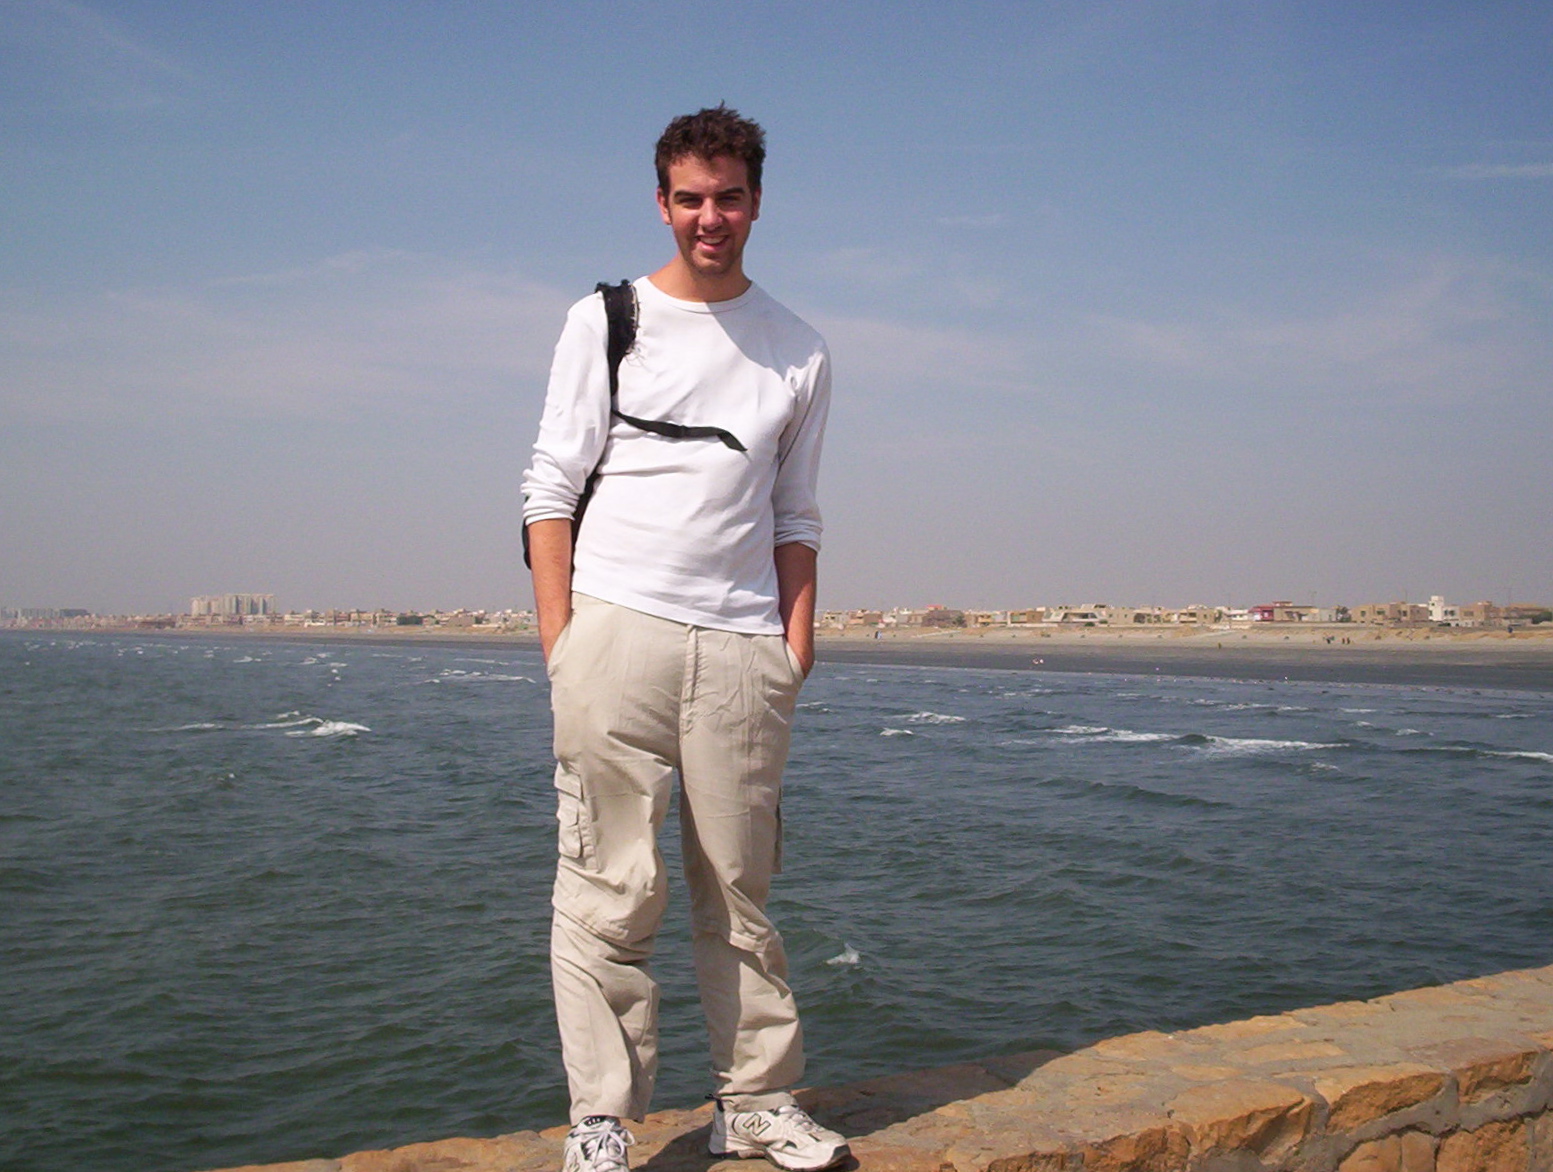 On the beach in Karachi many moons ago, during my first trip to Pakistan in 2006.